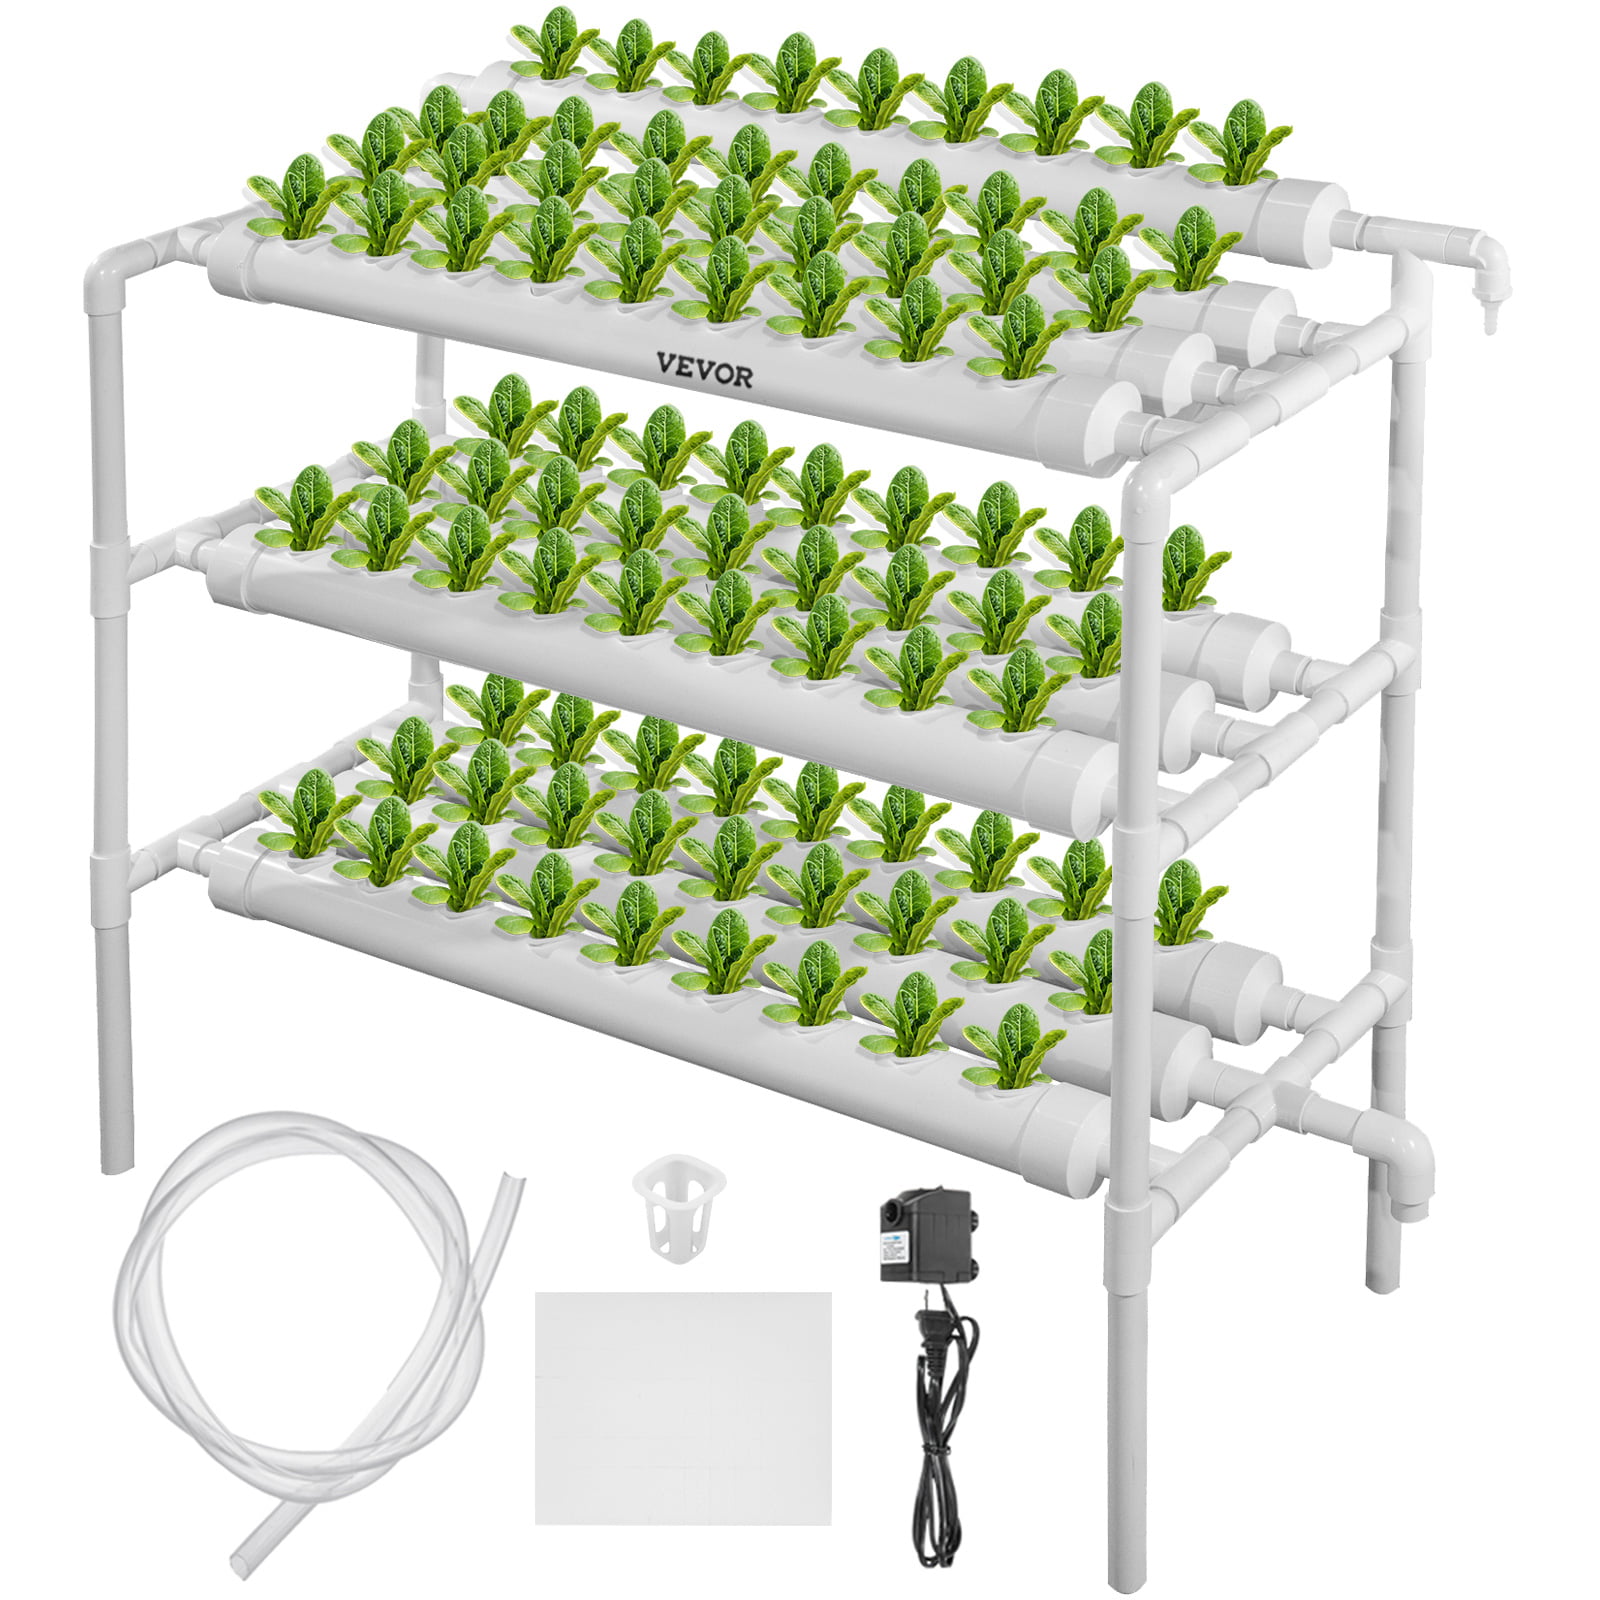 TECHTONGDA 141154 6 Sites Hydroponic Site Grow Kit Box-type Culture Garden Growing System for sale online 